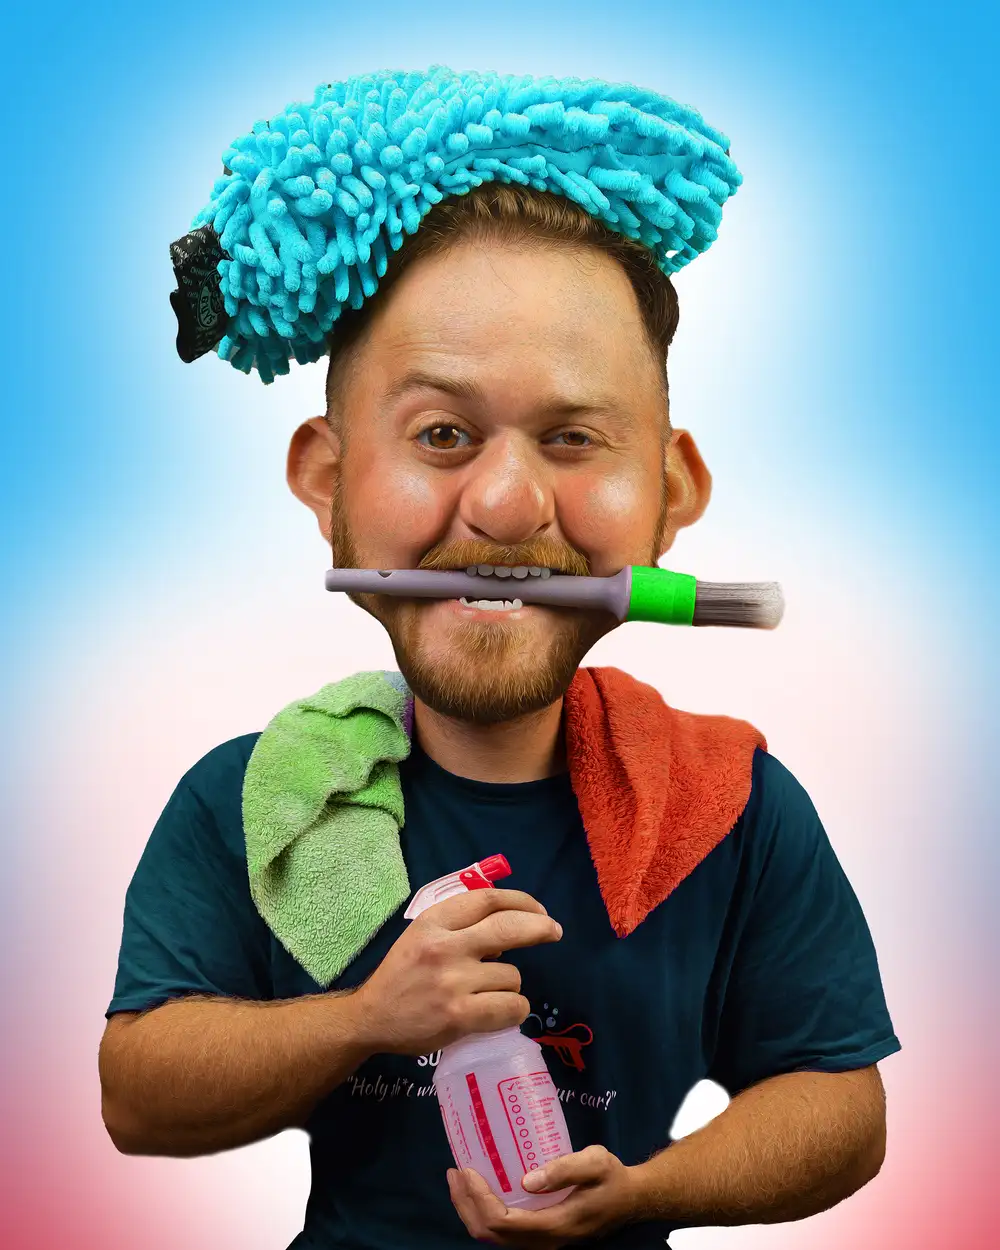 Creative Headshot Example. A cartoon style man wearing a normal t-shirt, with a brush in his mouth and a spray bottle in his hand.